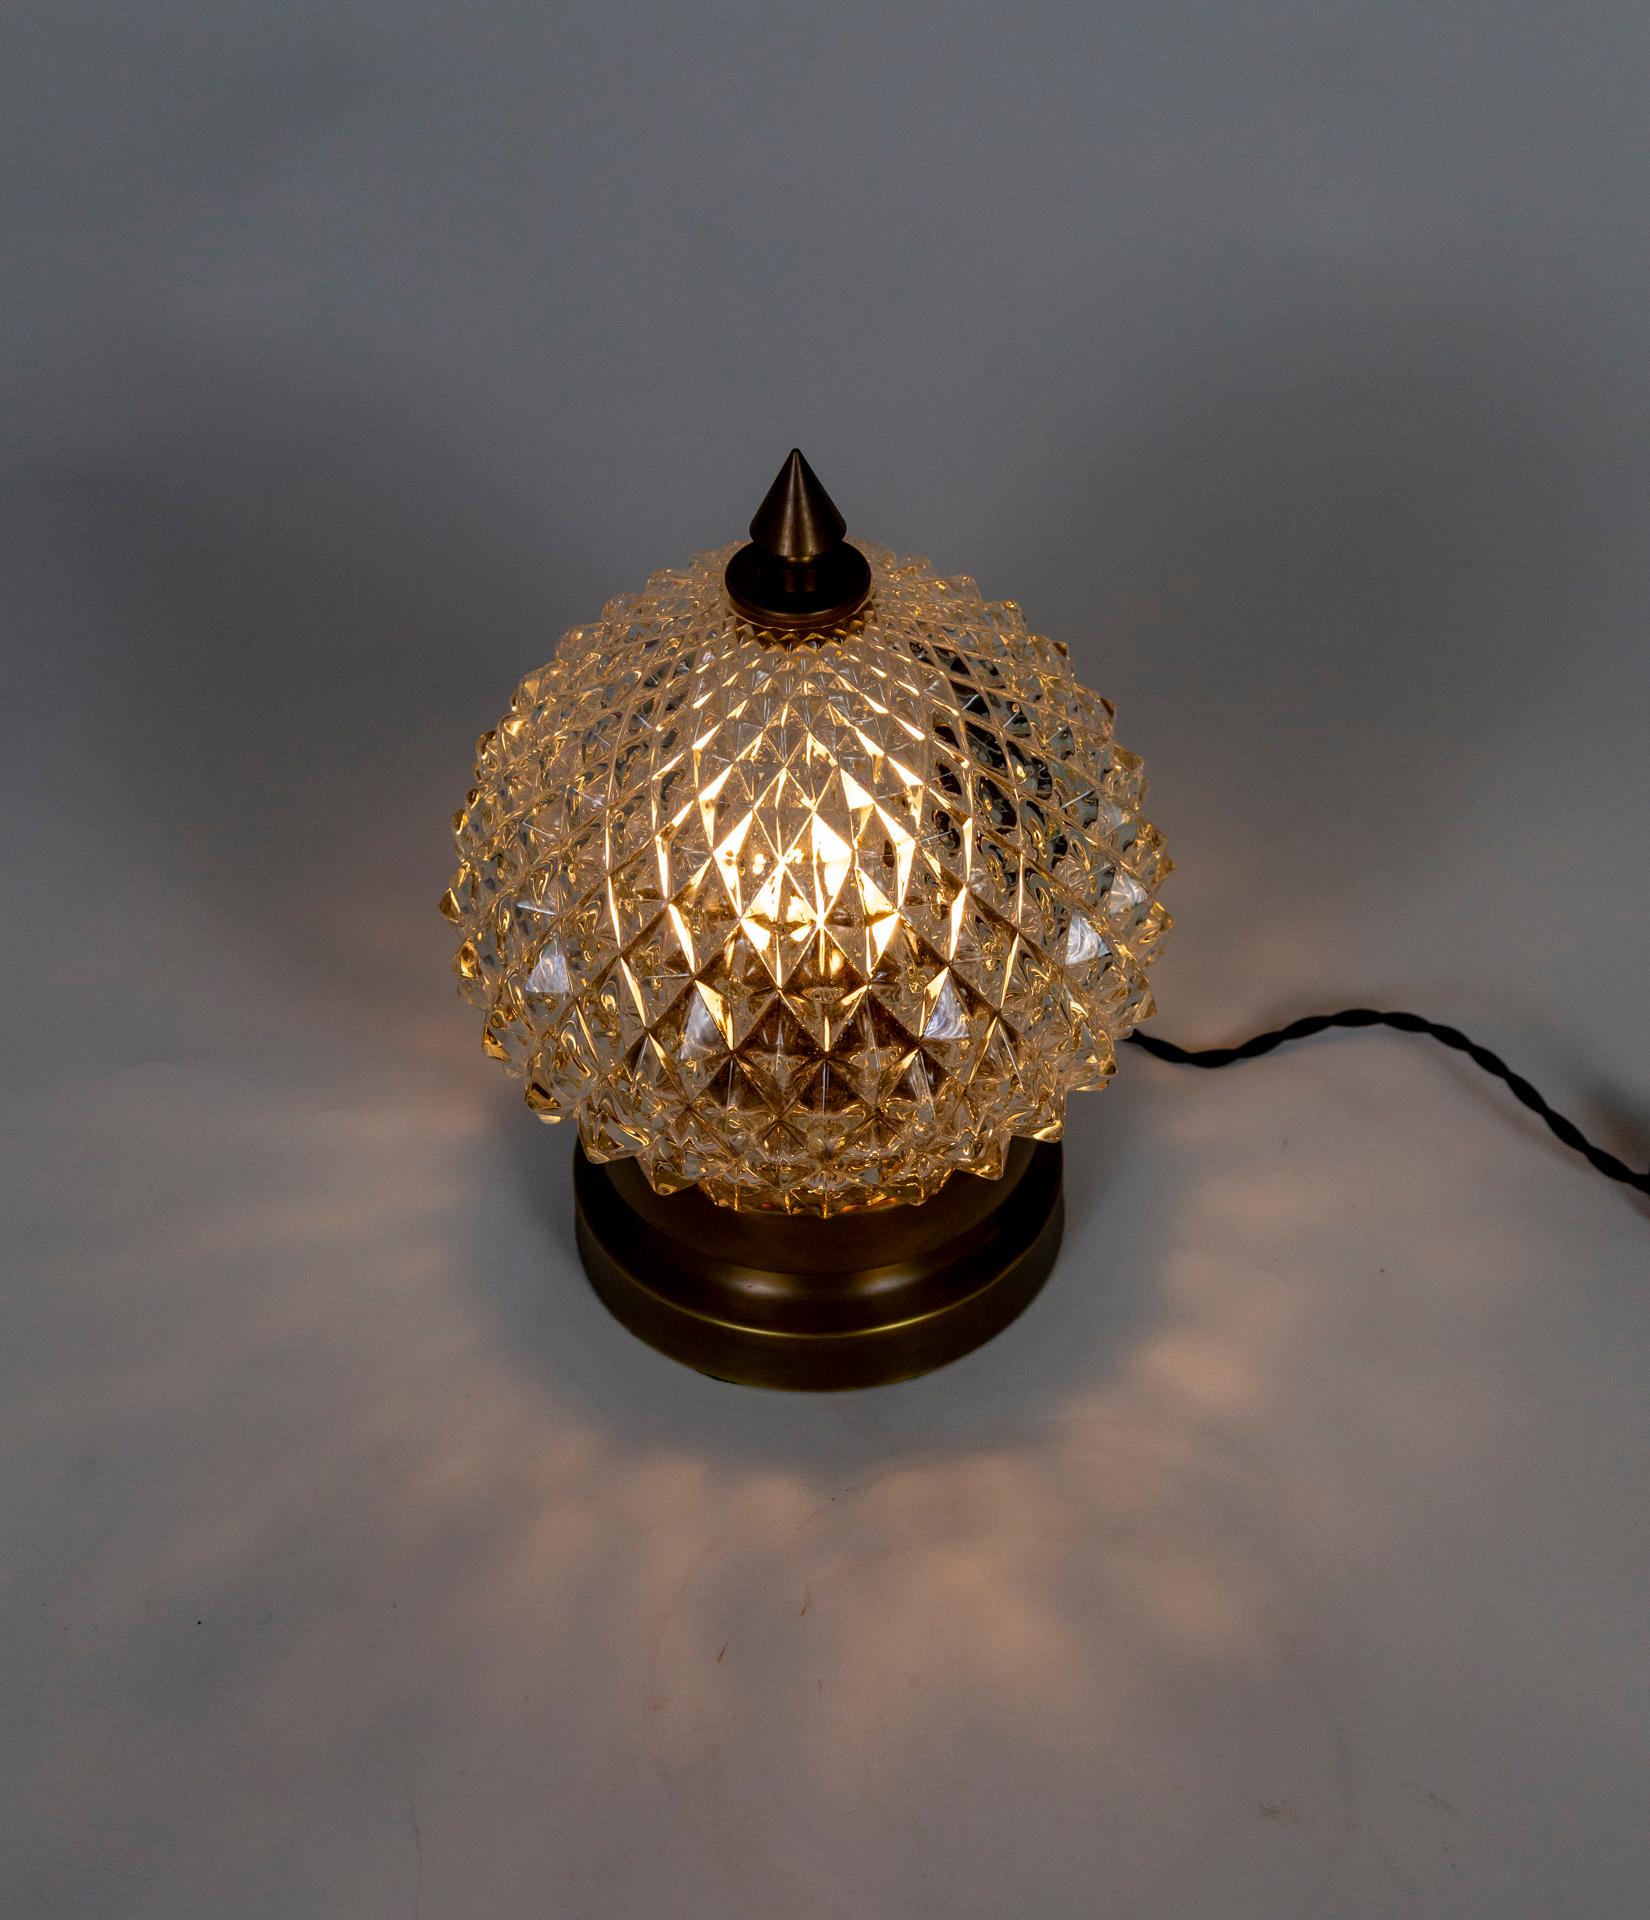 A vintage, diamond crystal, pressed glass shade repurposed into a petite lamp with solid brass parts. Newly wired with a dimming switch on the cord. The petite shape and dimming capability make it perfect for mood lighting and bookshelves. One